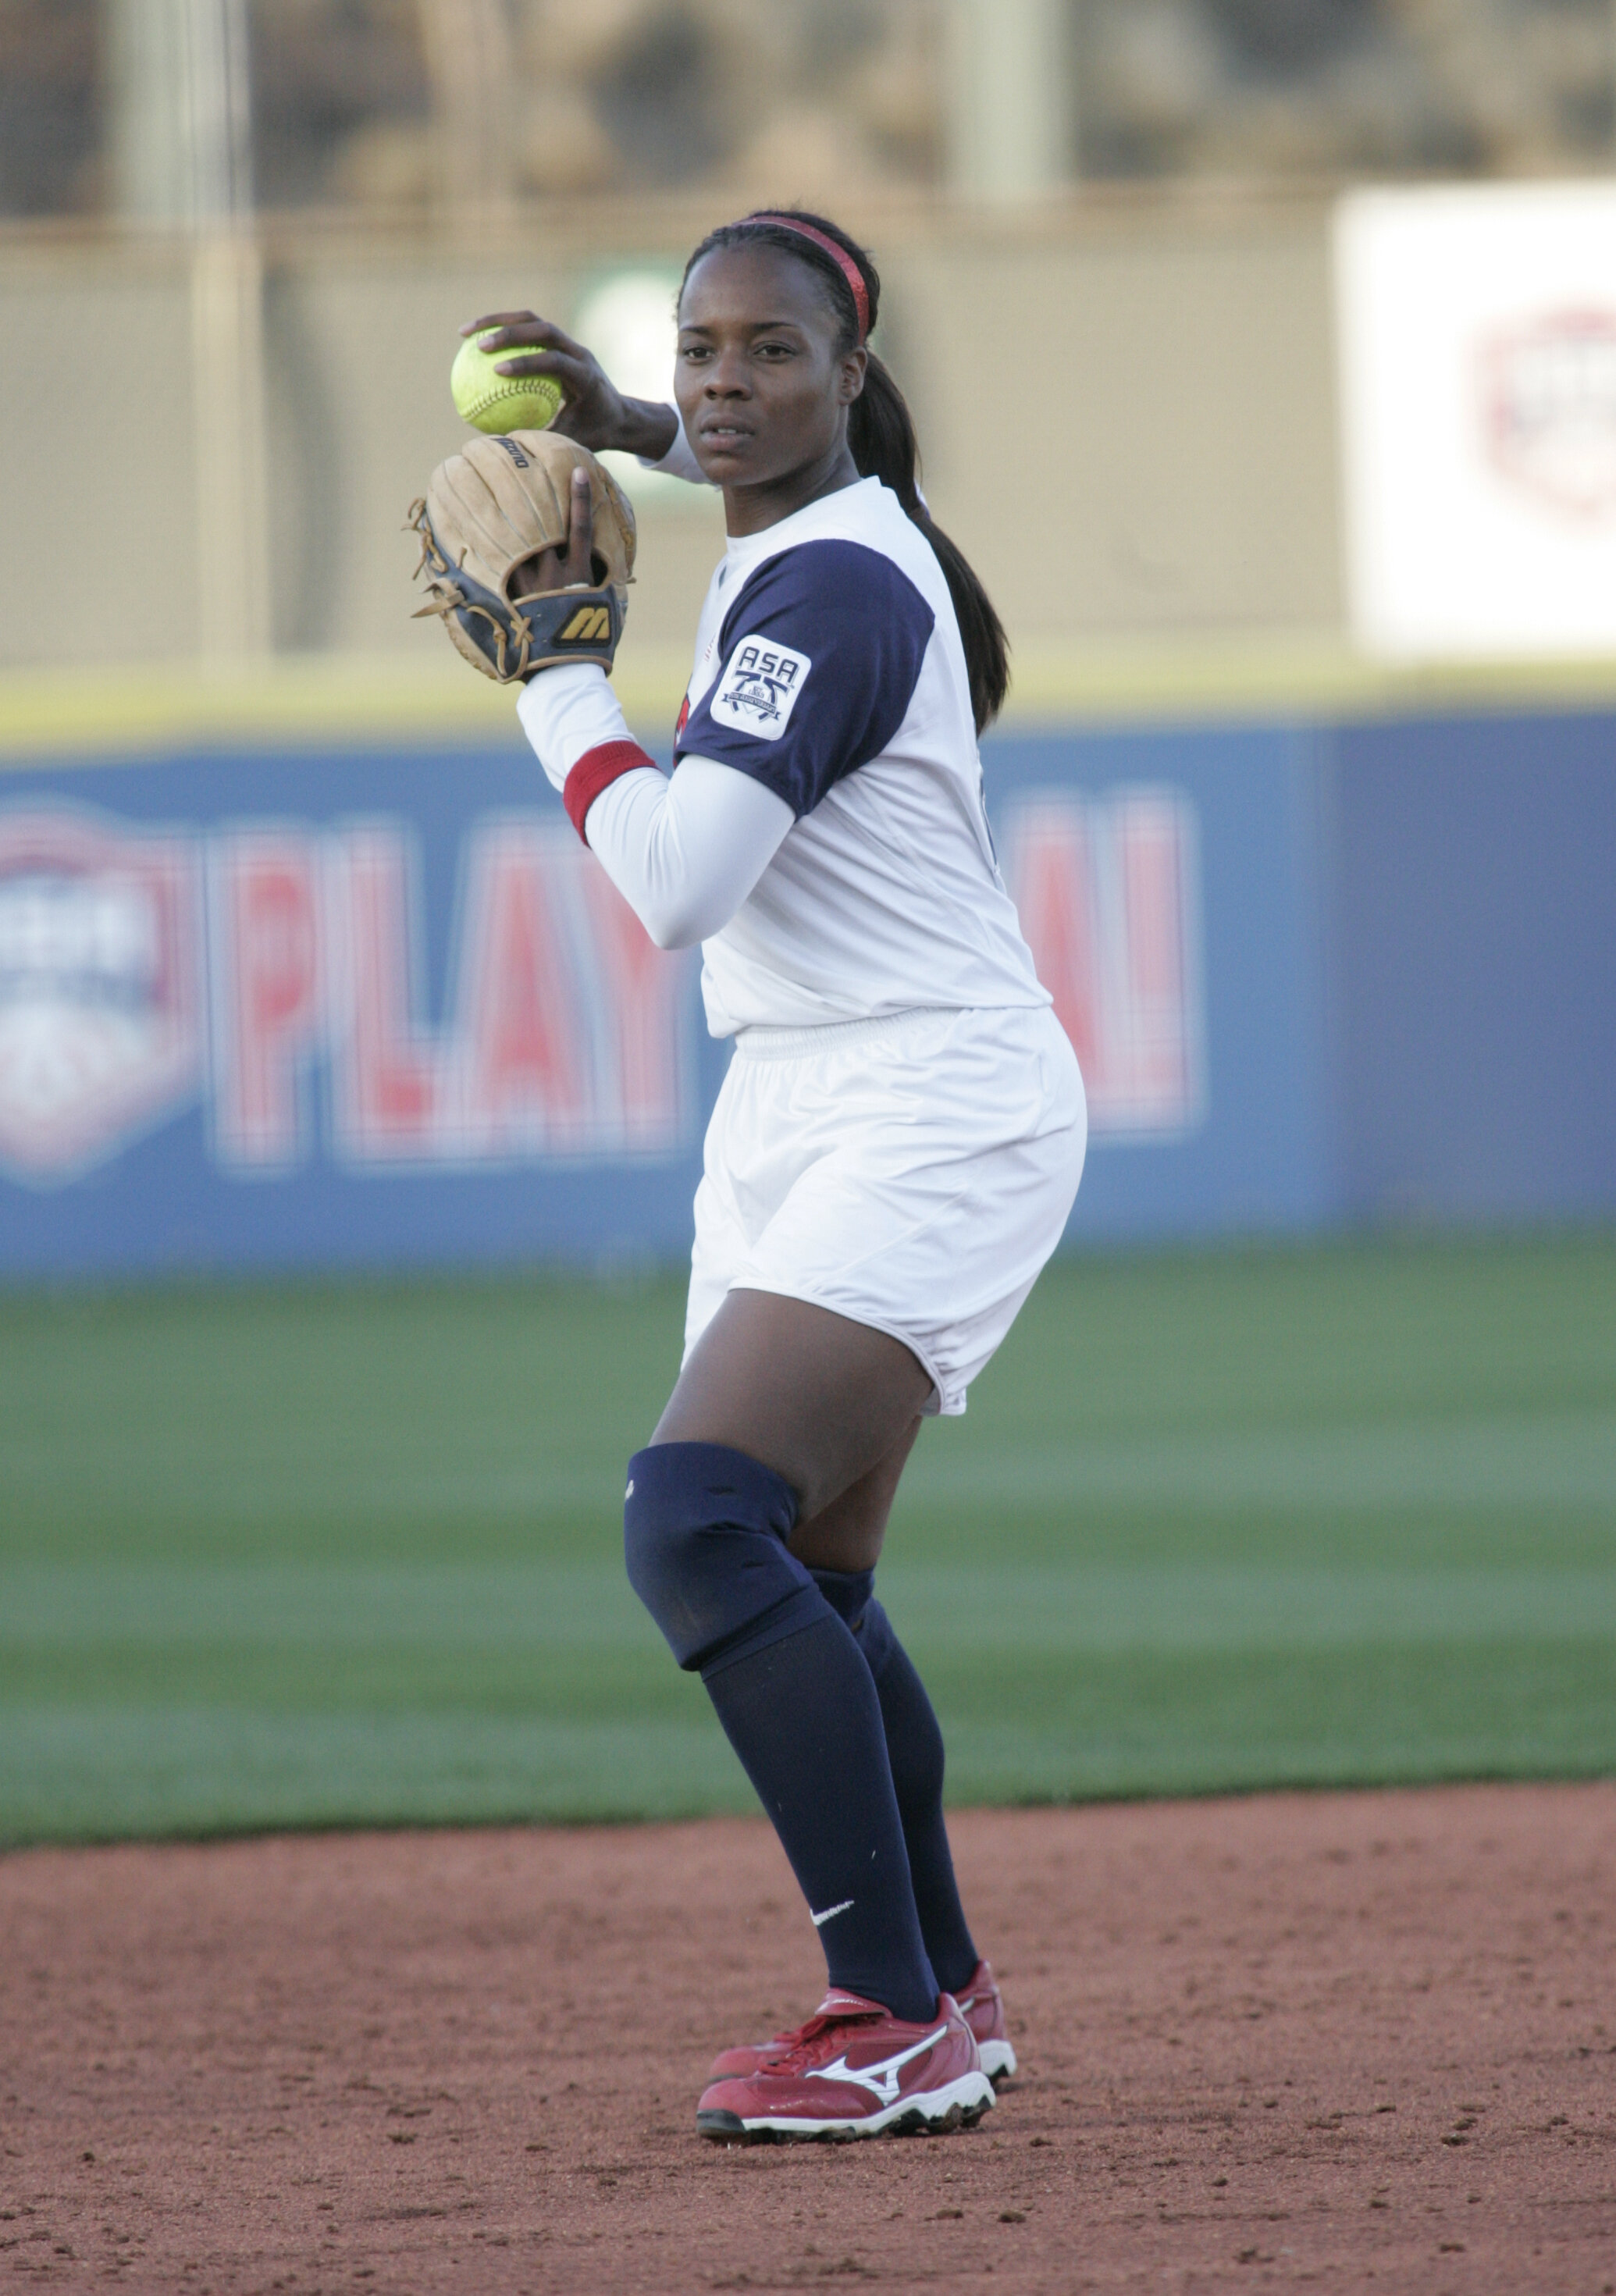 Natasha Watley On Her Olympic Journey And Hopes For The Future Of Softball Assembly Malala Fund